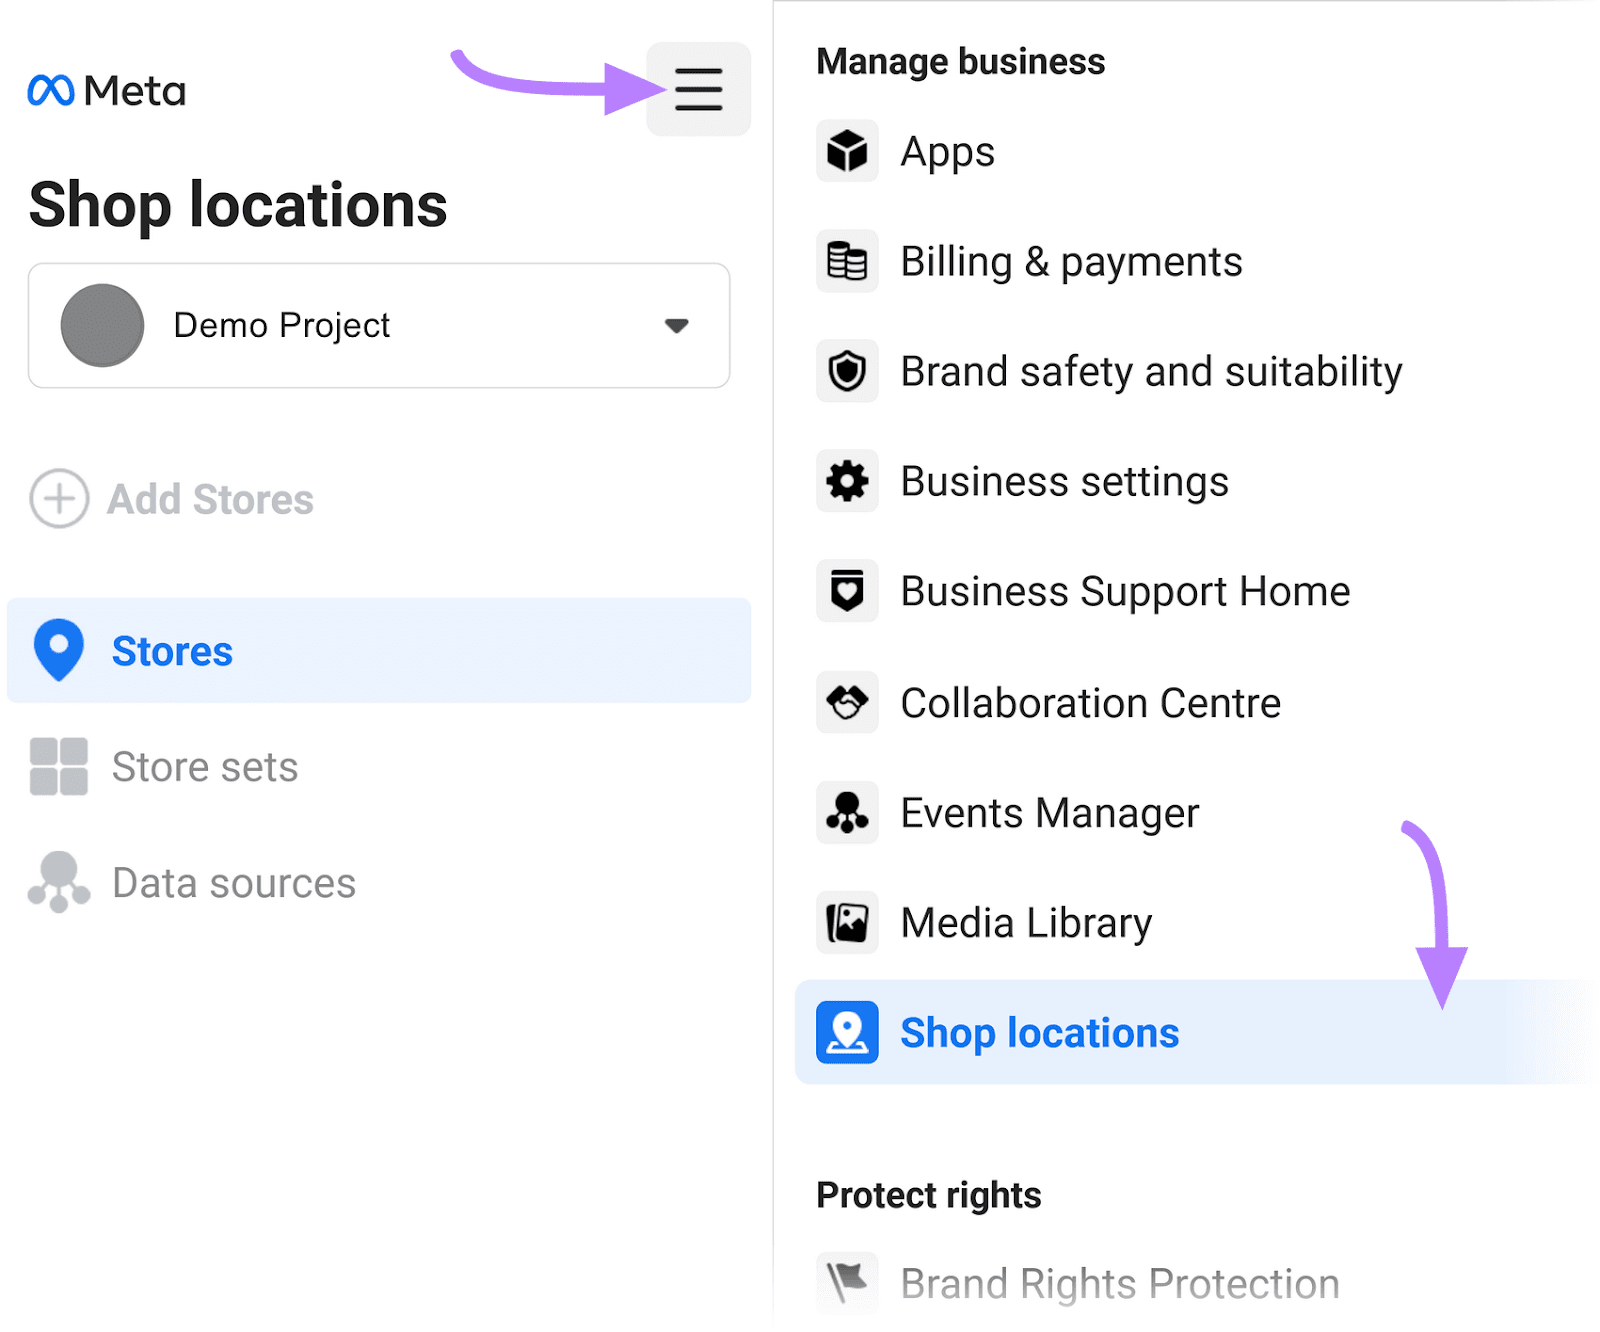 “Shop locations" selected from the "Manage business" menu options